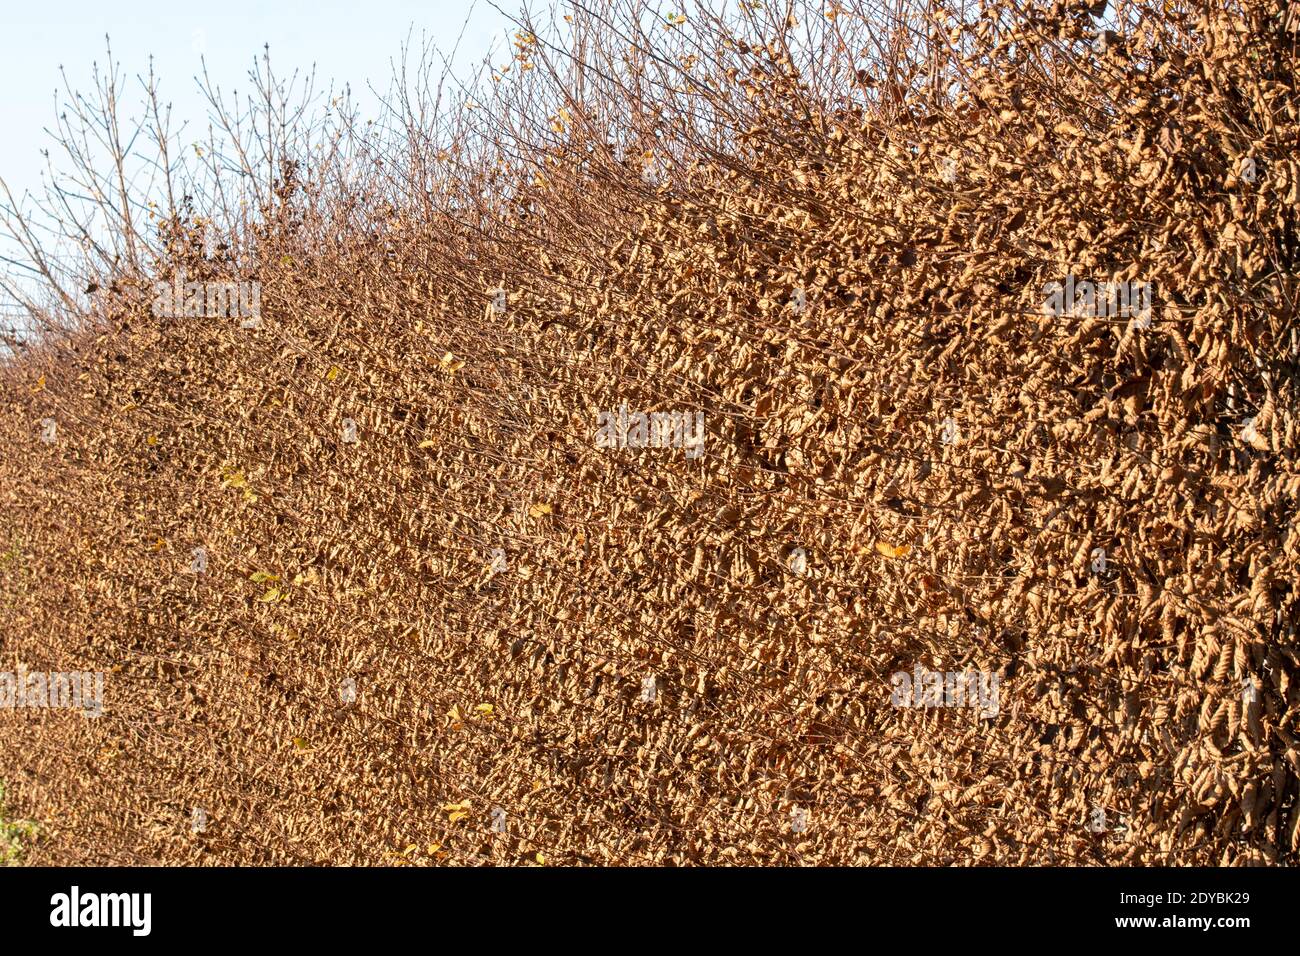 Beech hedge in autumn, winter with its brown and dry foliage. Stock Photo